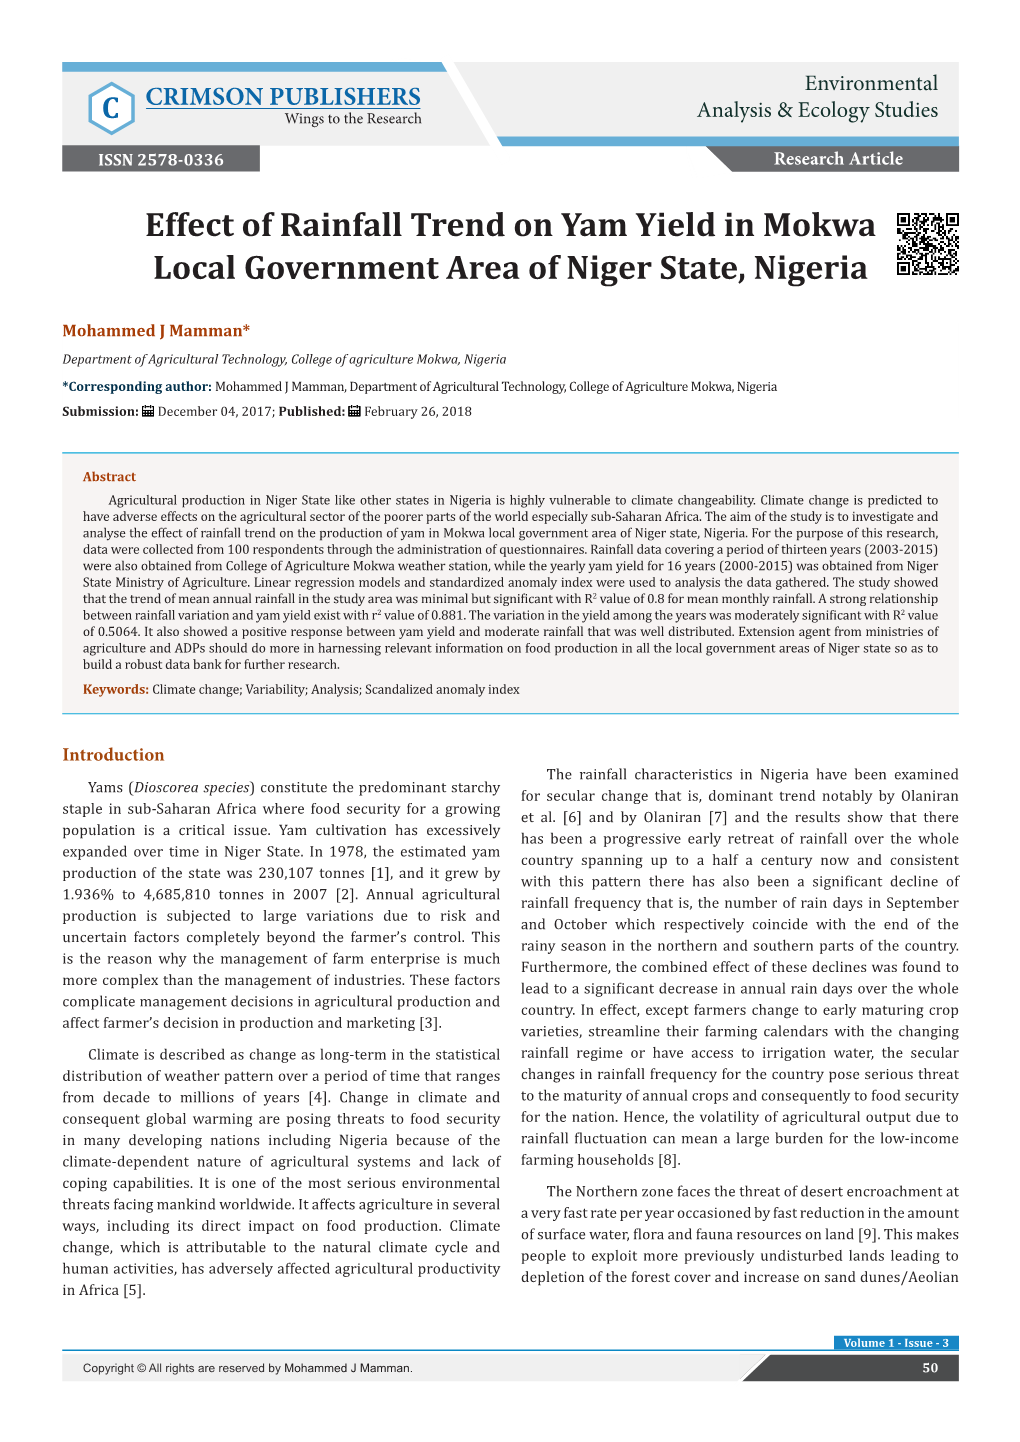 Effect of Rainfall Trend on Yam Yield in Mokwa Local Government Area of Niger State, Nigeria